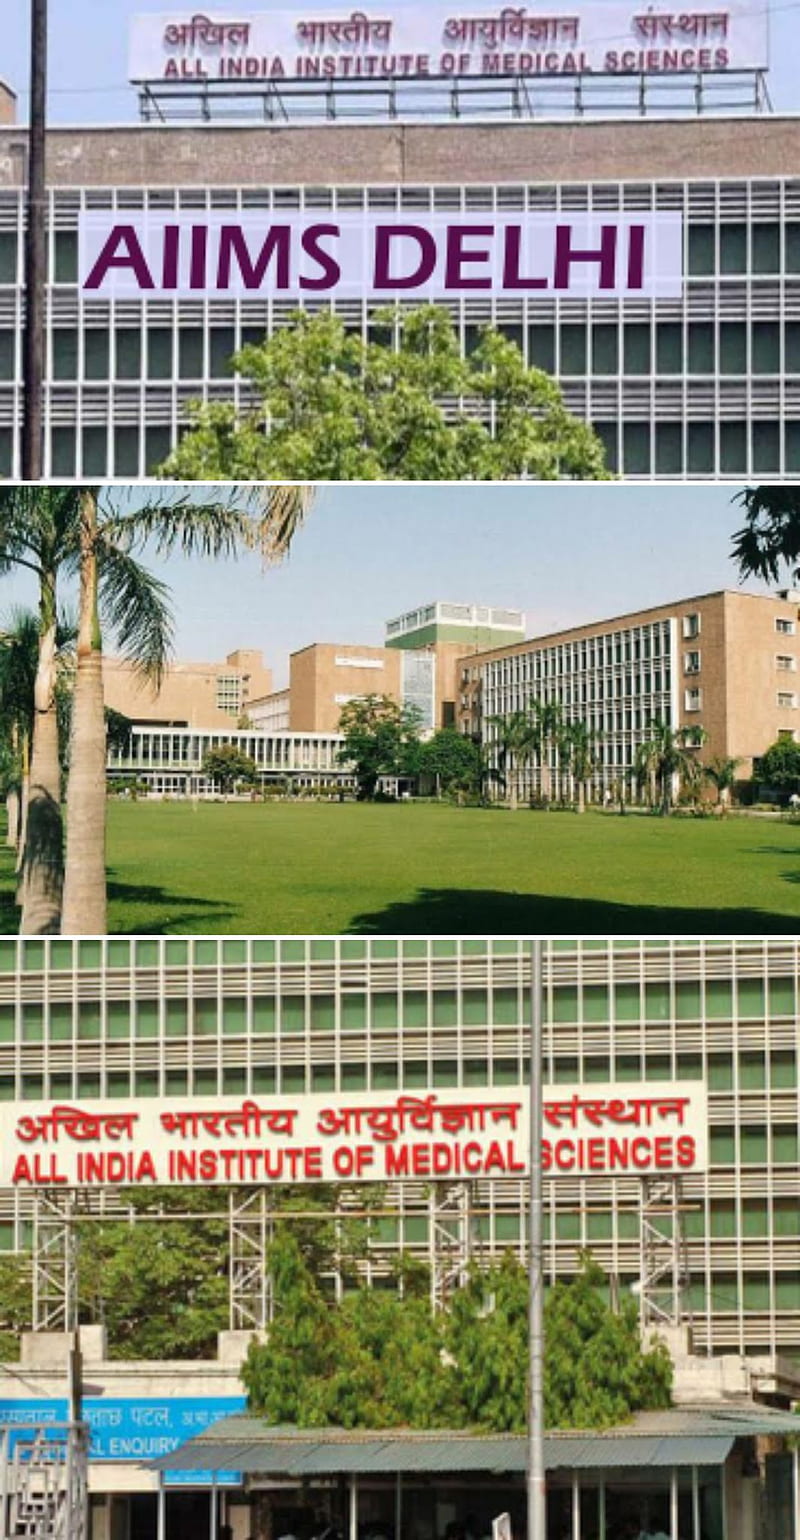 Aiims Cancells Mock Next Exam Scheduled For July 28, Check Details:  Results.amarujala.com